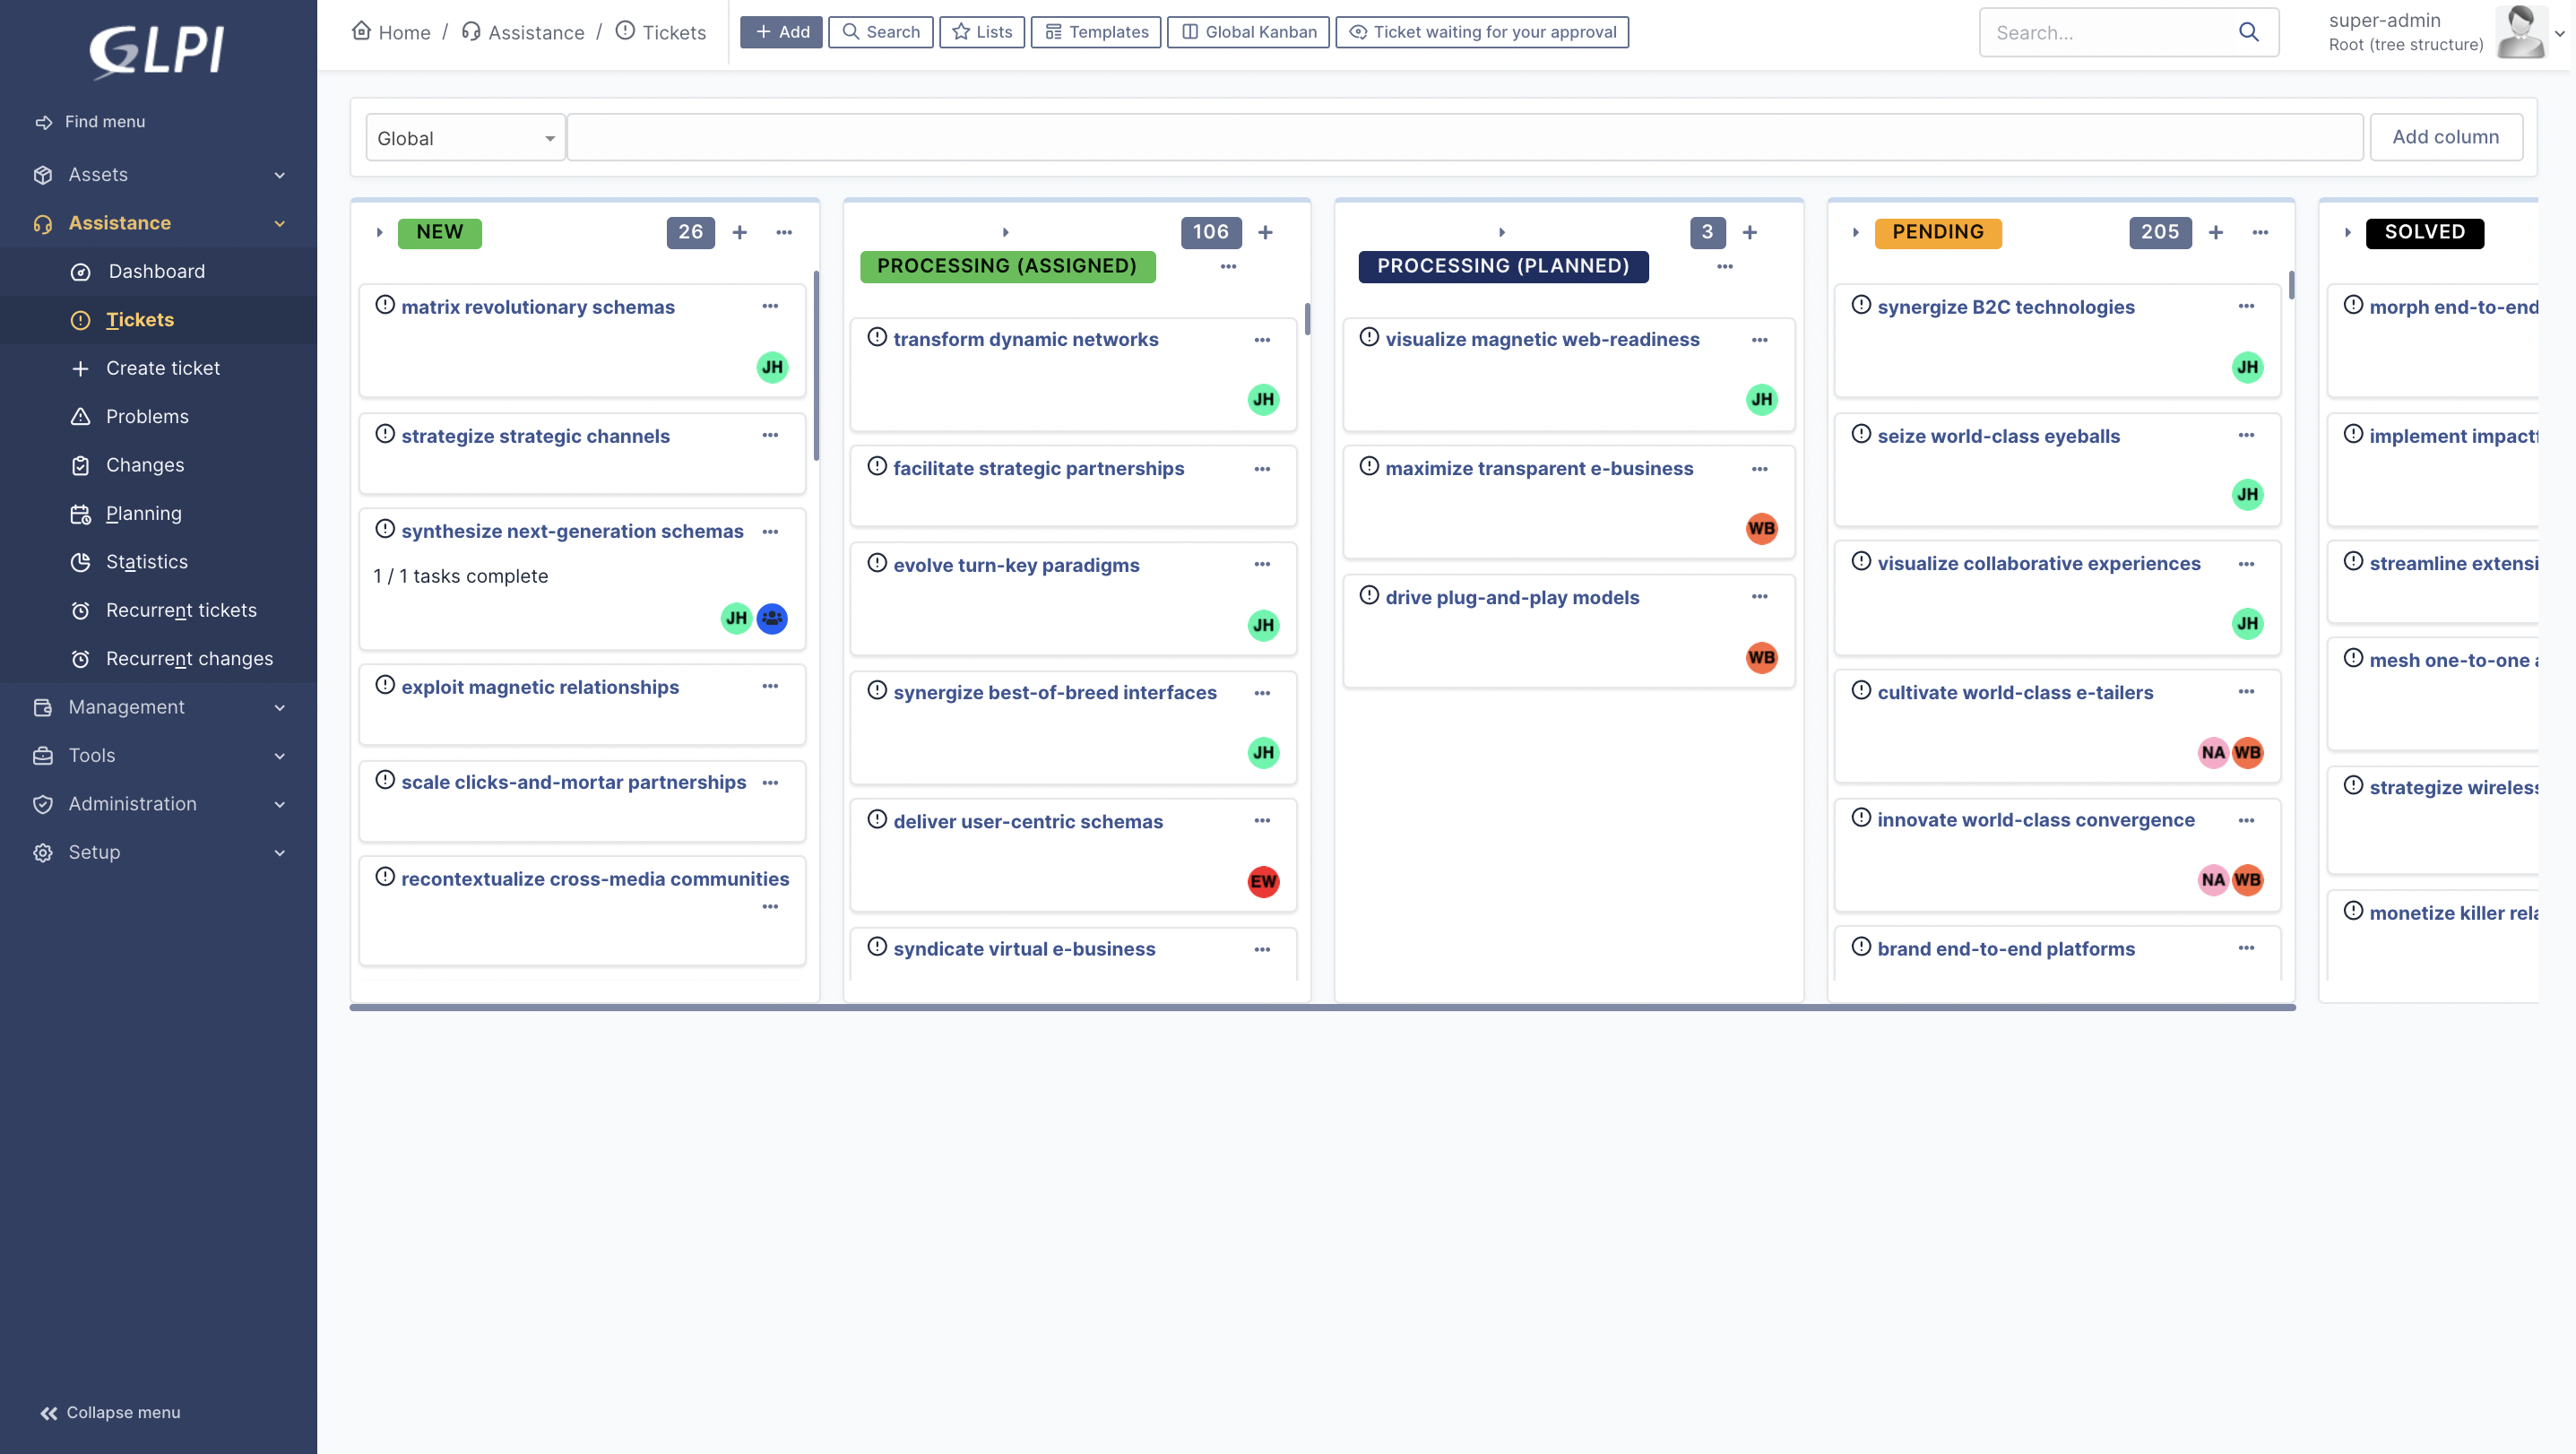 GLPi Software - Kanban view for ITIL objects